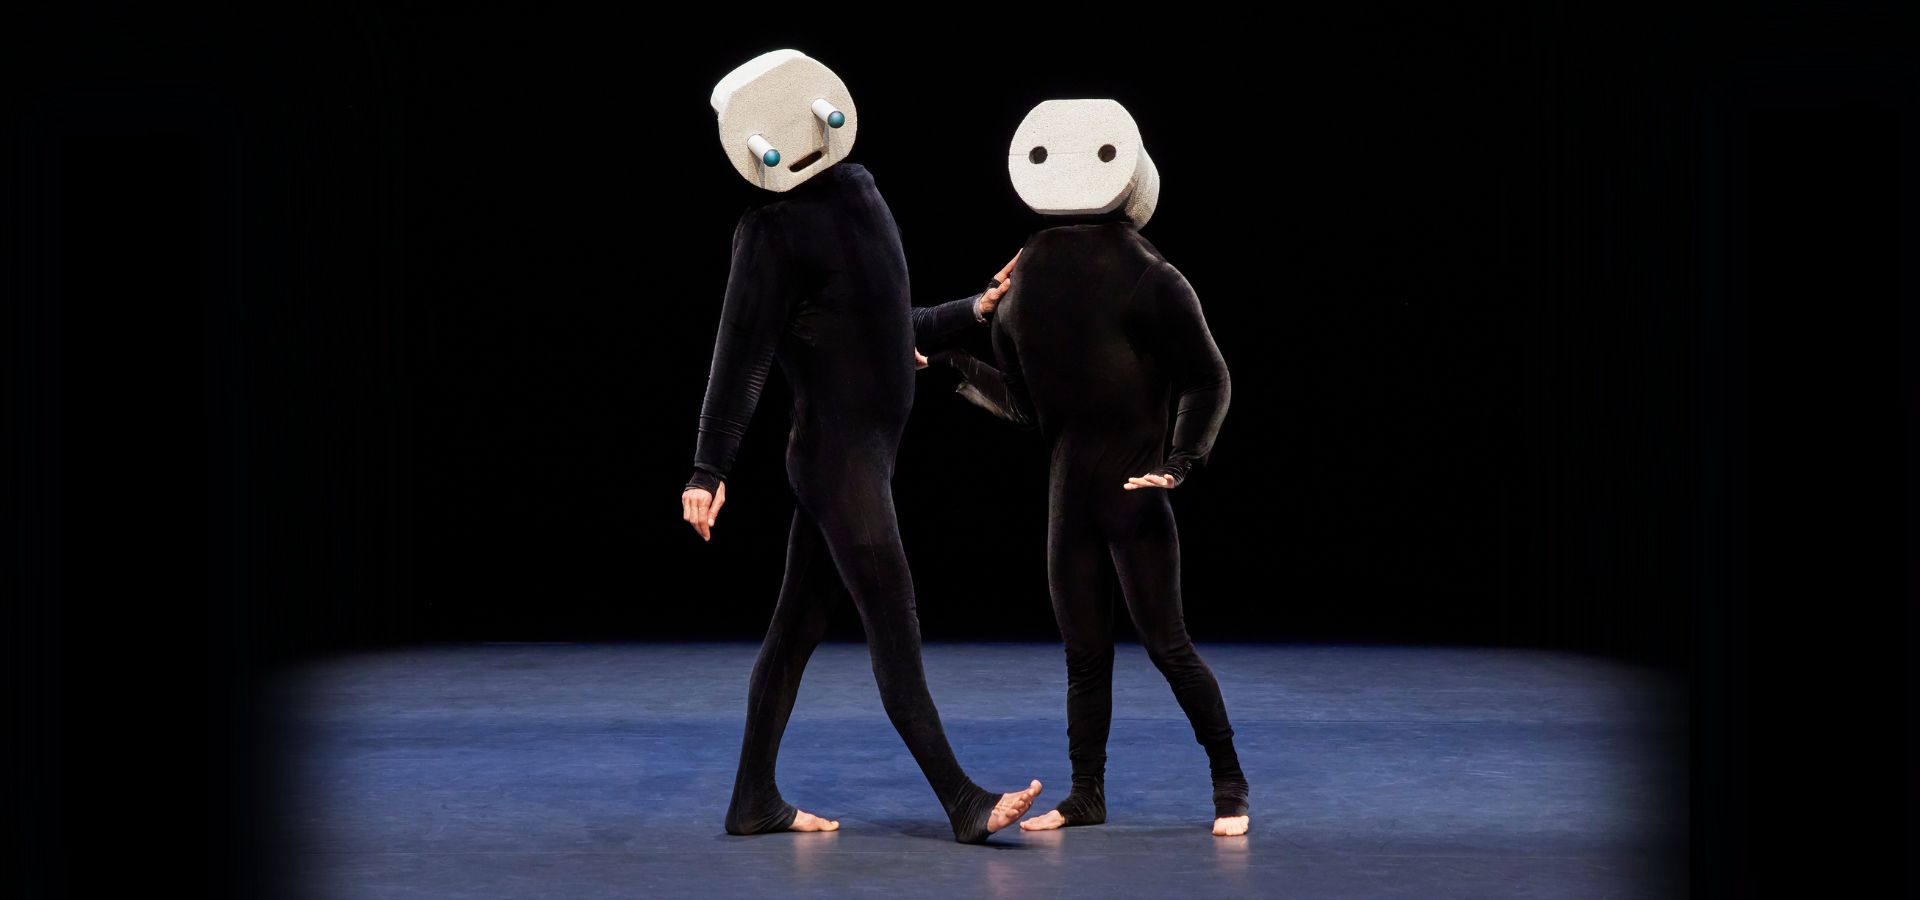 Two performers in all-black outfits with animated geometric masks on their heads stand next to each other center-stage.